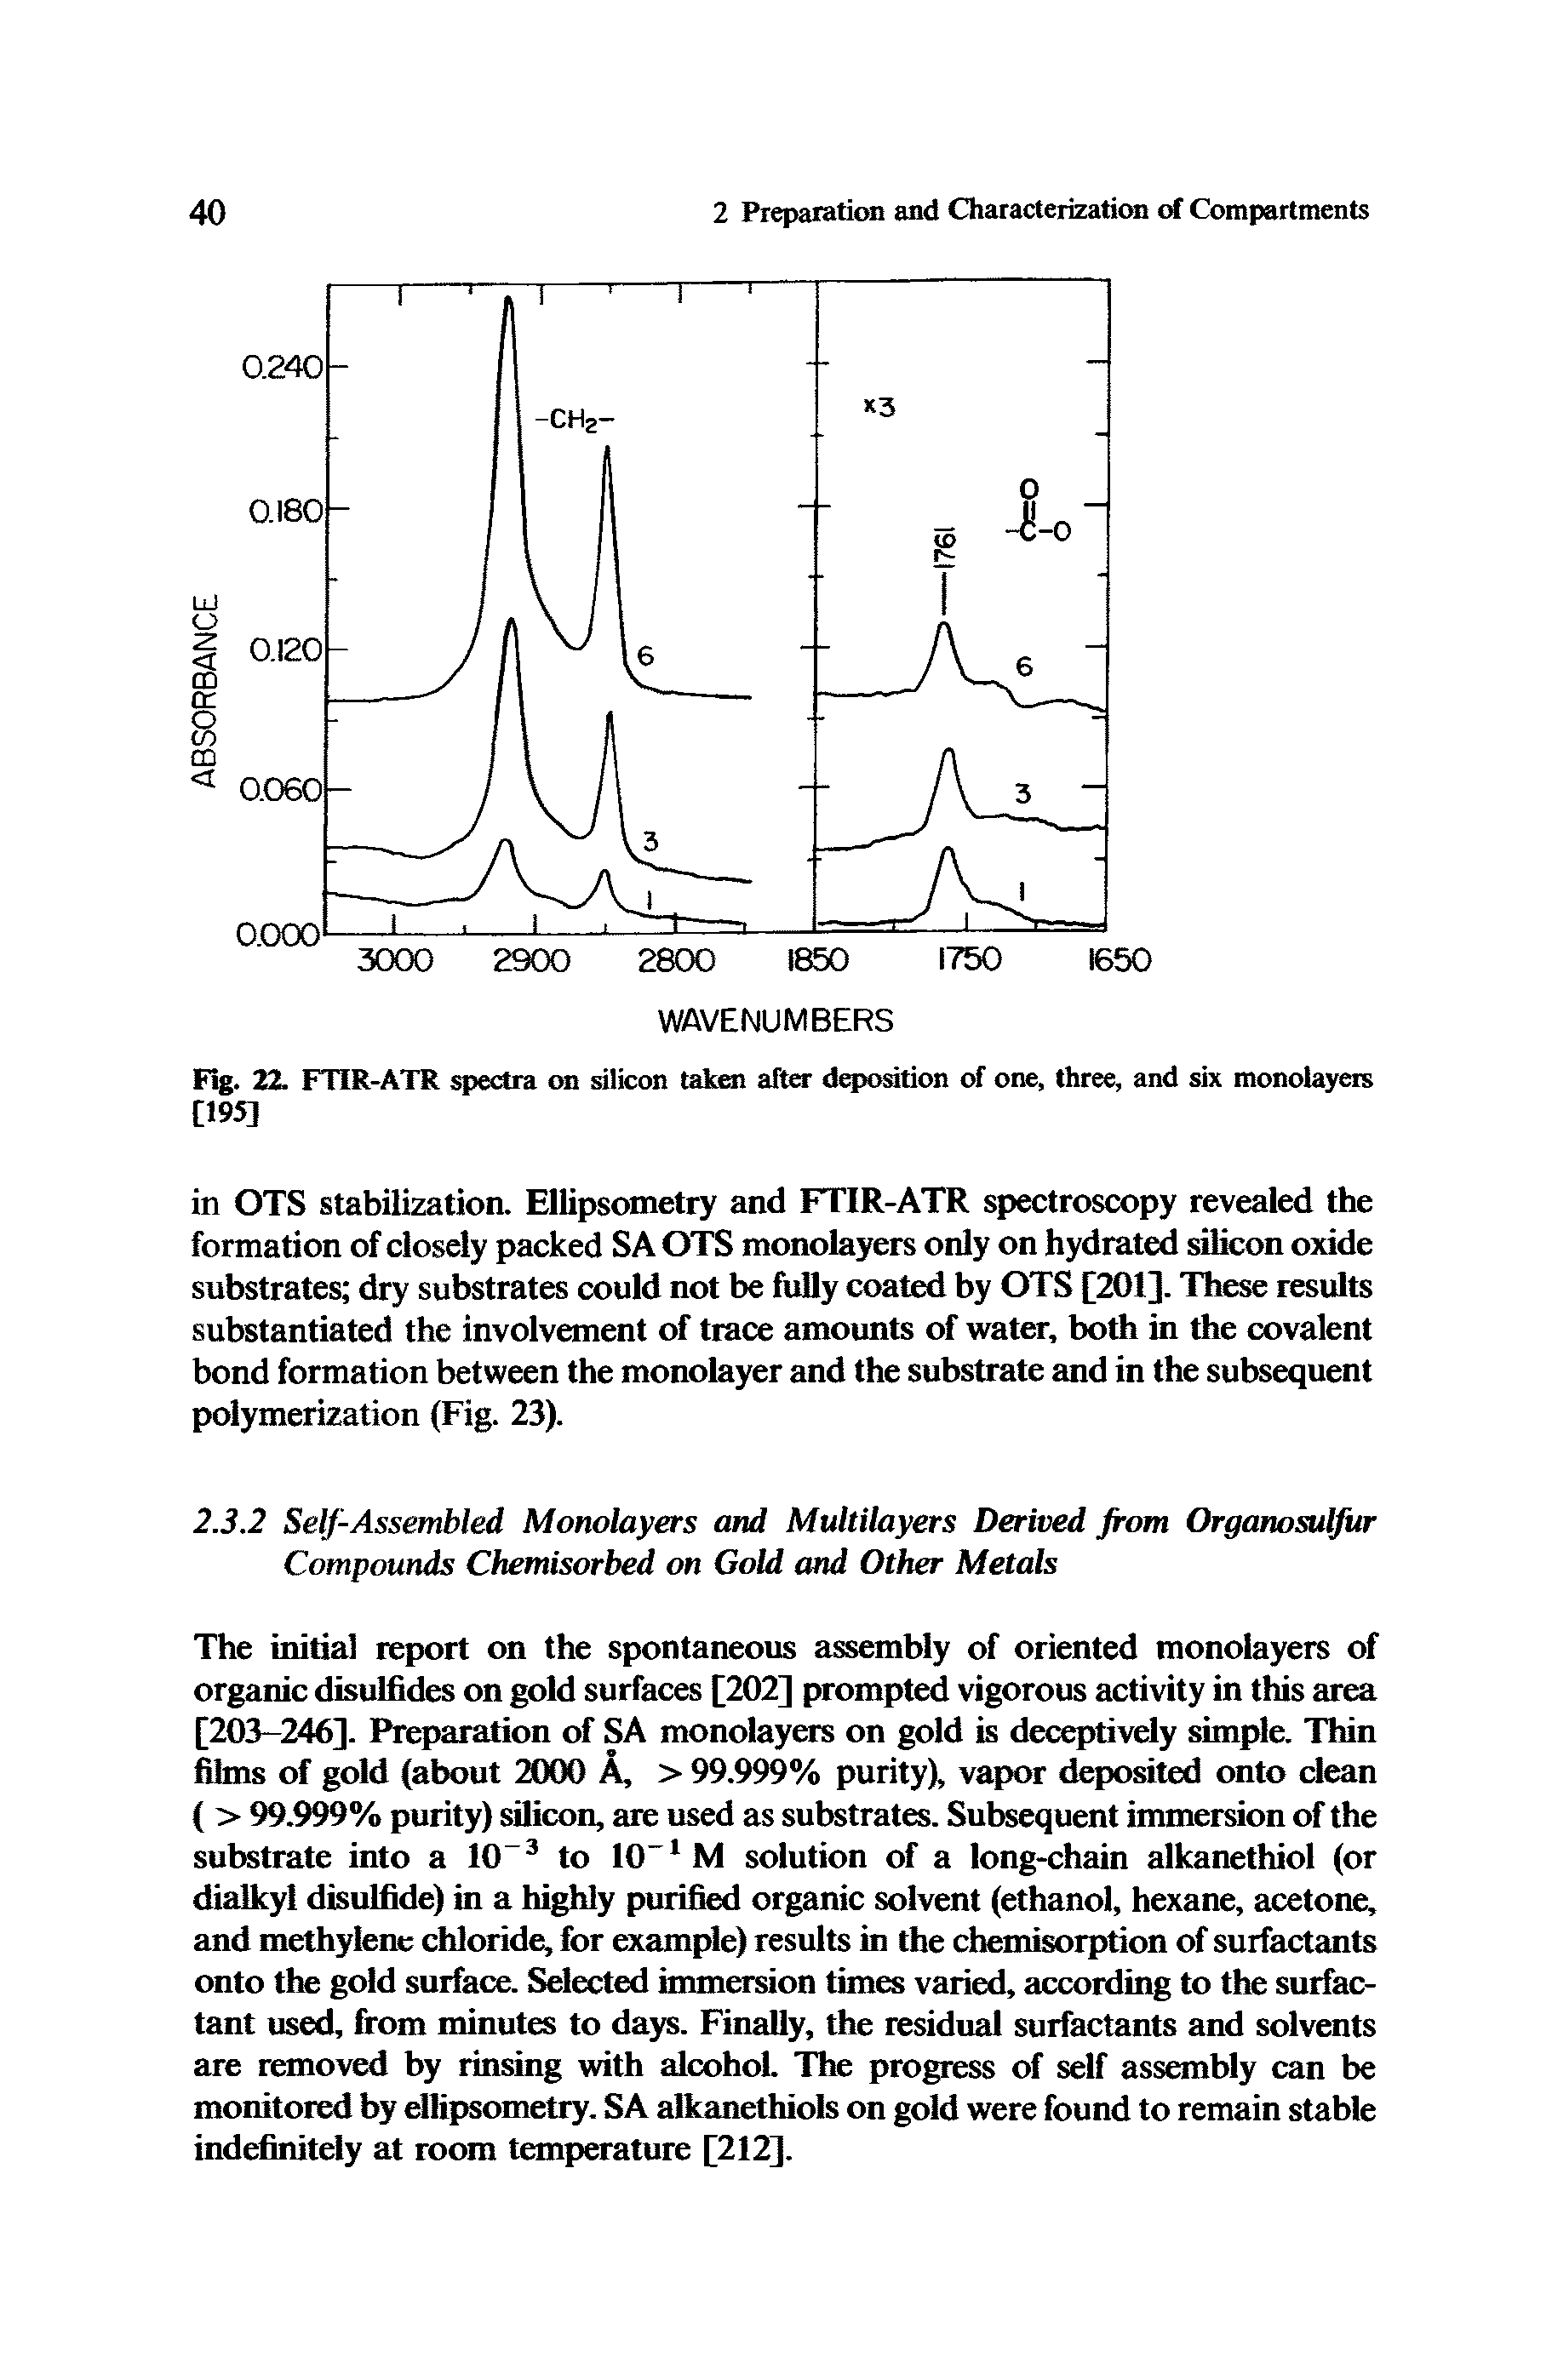 Fig. 22. FTIR-ATR spectra on silicon taken after deposition of one, three, and six monolayers C195]...